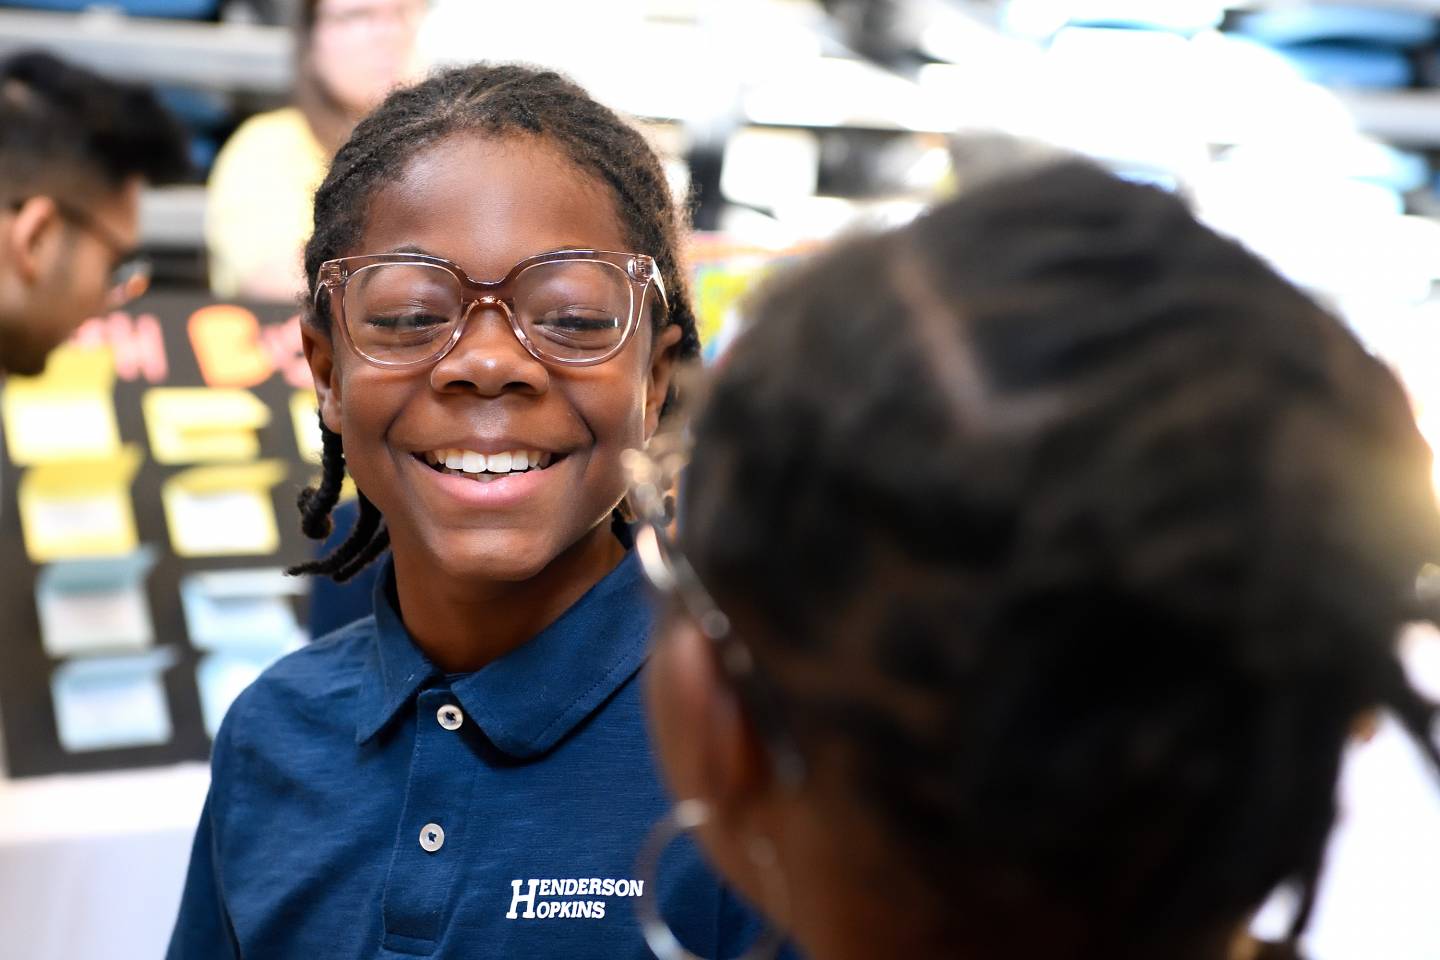 An elementary school student smiles while trying on eyeglasses